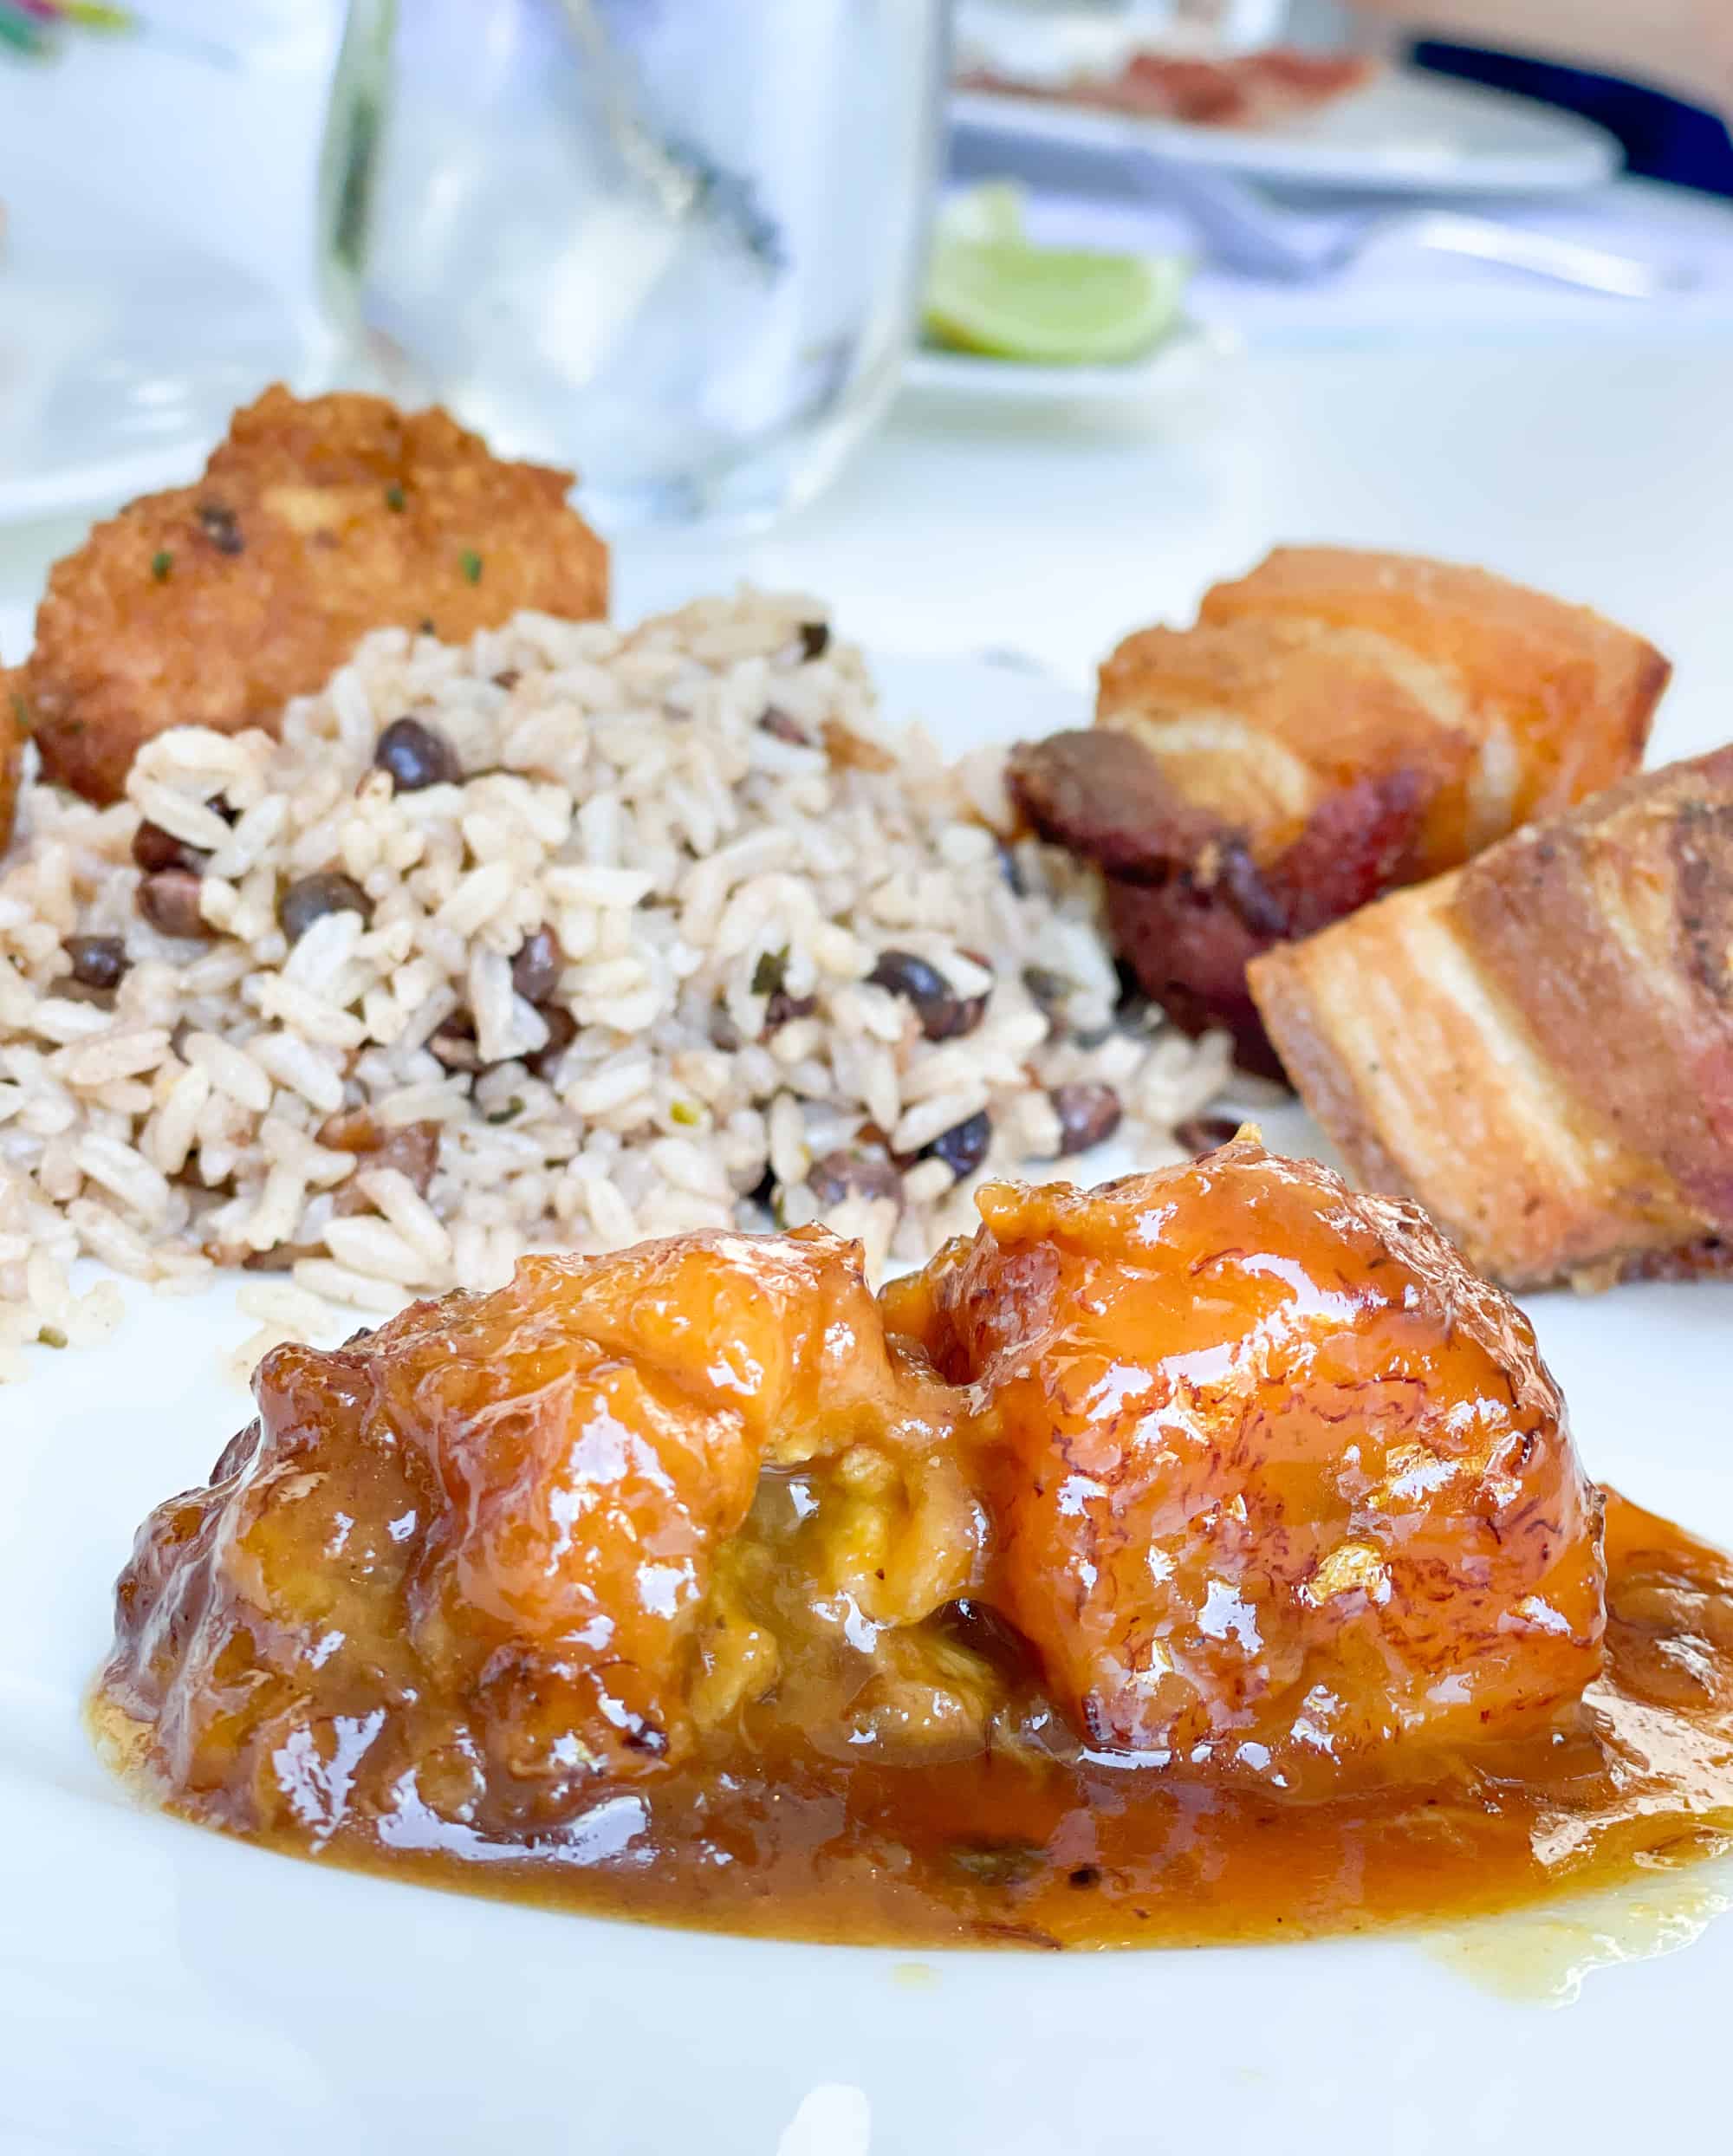 Dominican Republic - stewed plantain, manioc croquetas, pork belly and rice with pigeon peas